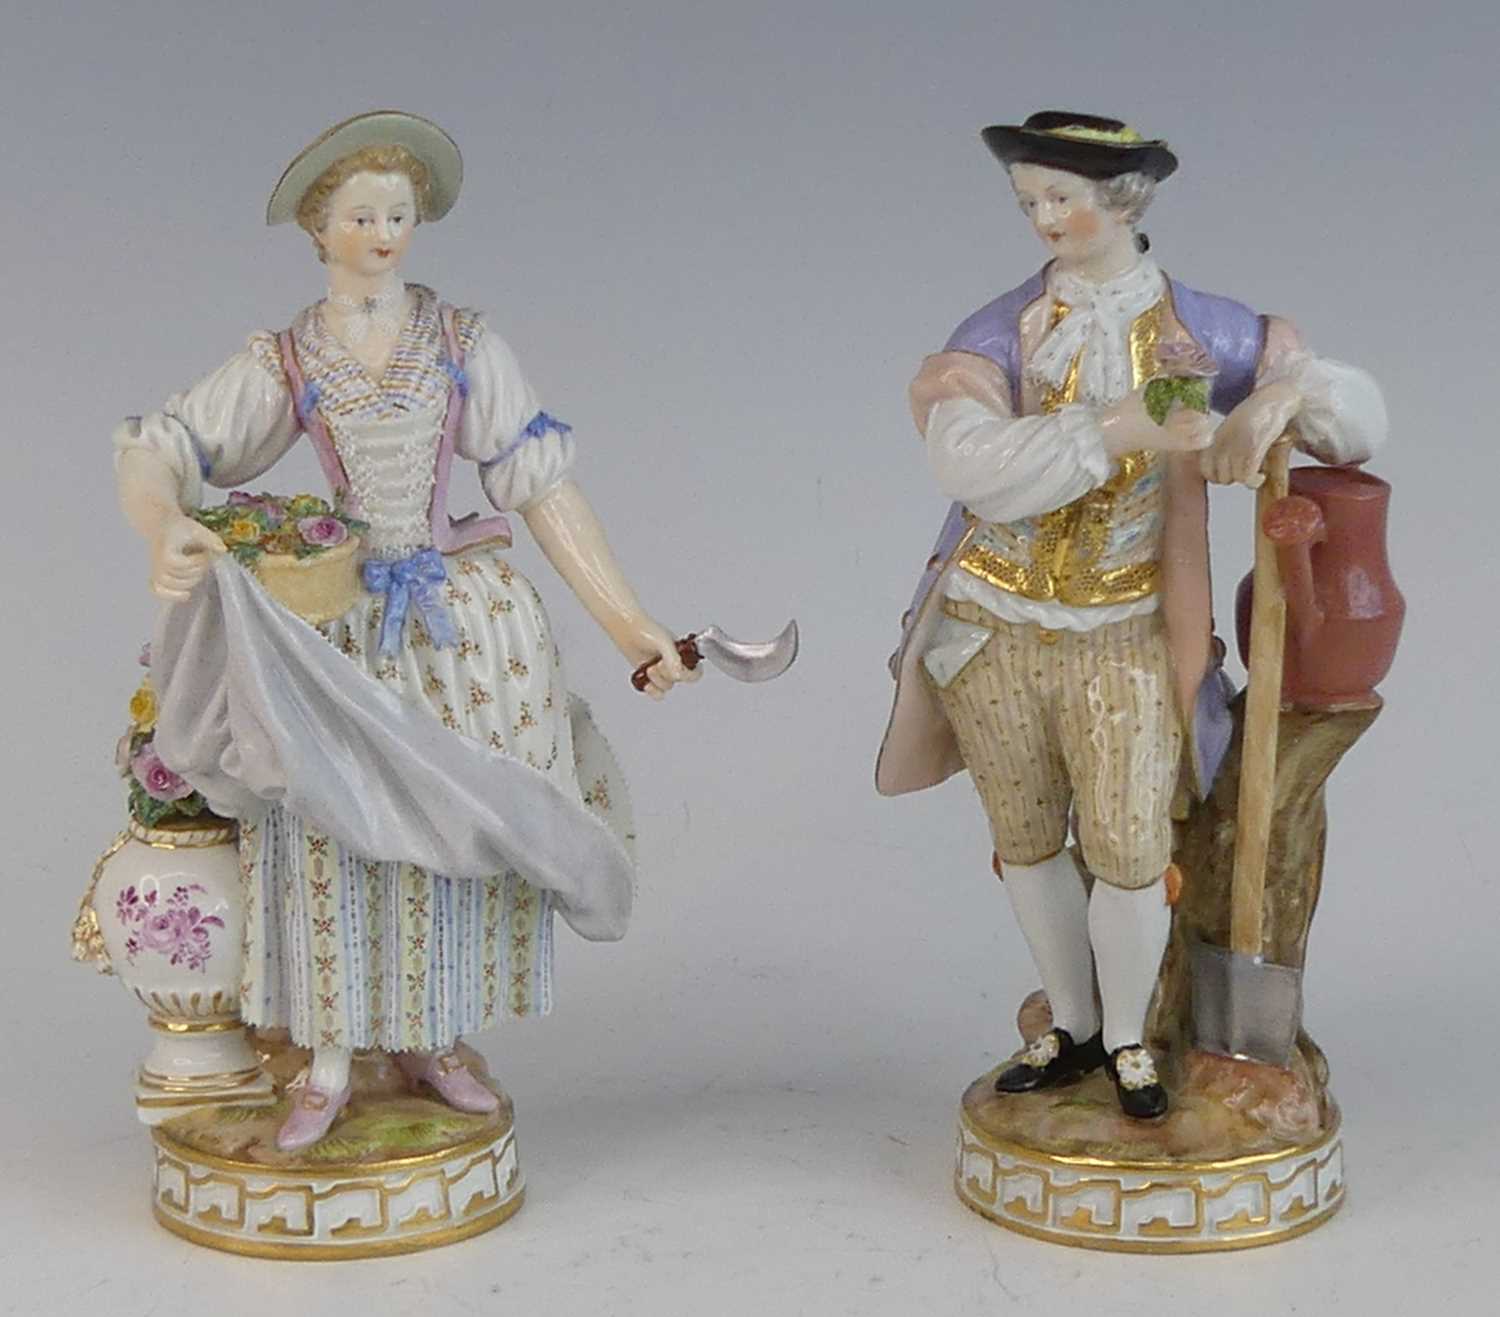 A pair of Meissen porcelain figures of gardeners, late 19th century, each shown in 18th century